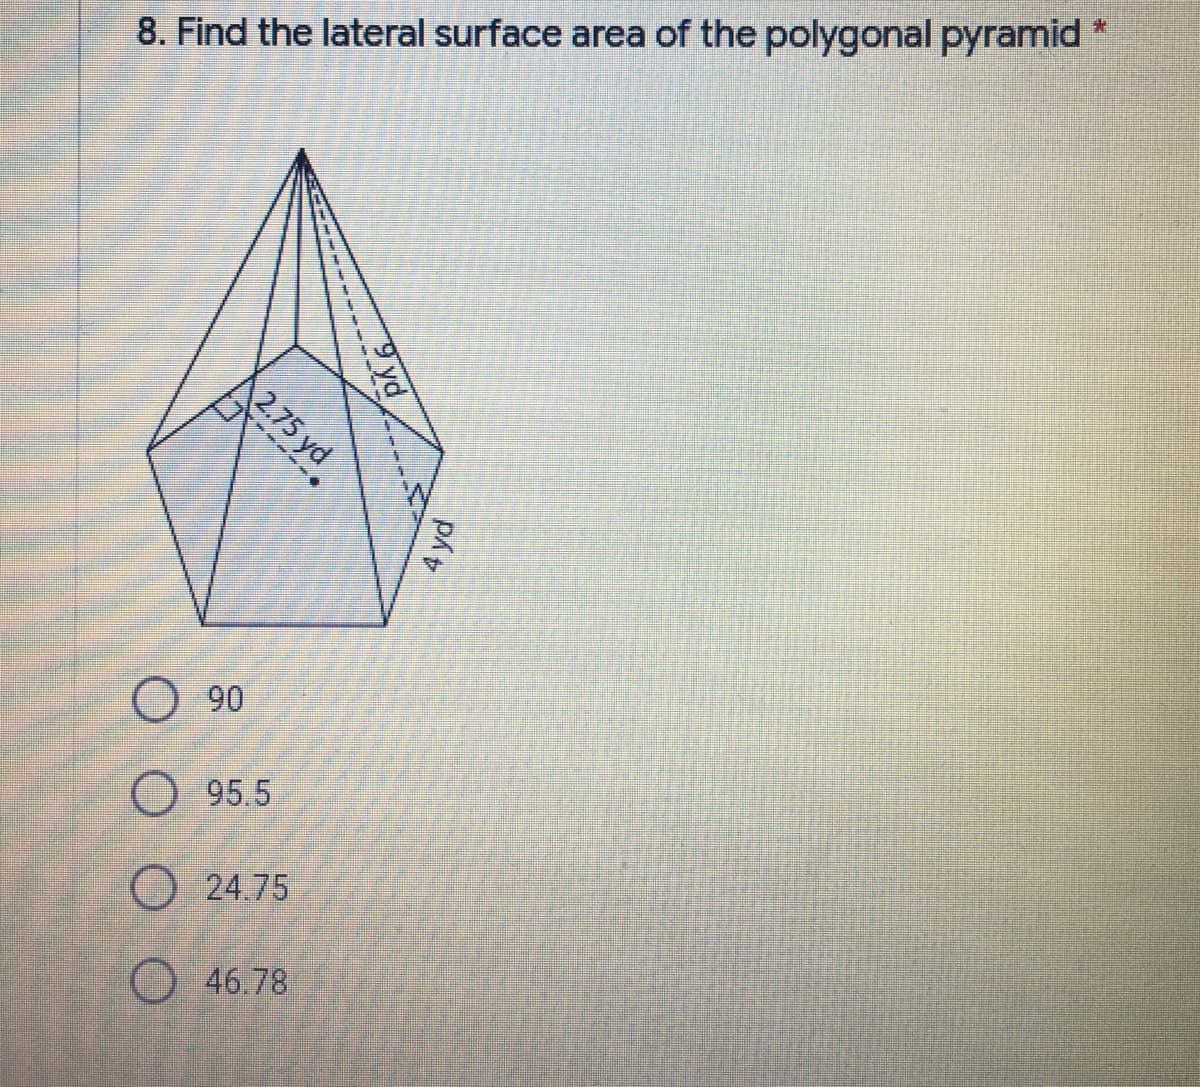 8. Find the lateral surface area of the polygonal pyramid
O 90
O 95.5
O 24.75
O46.78
yd
2.75 yd
